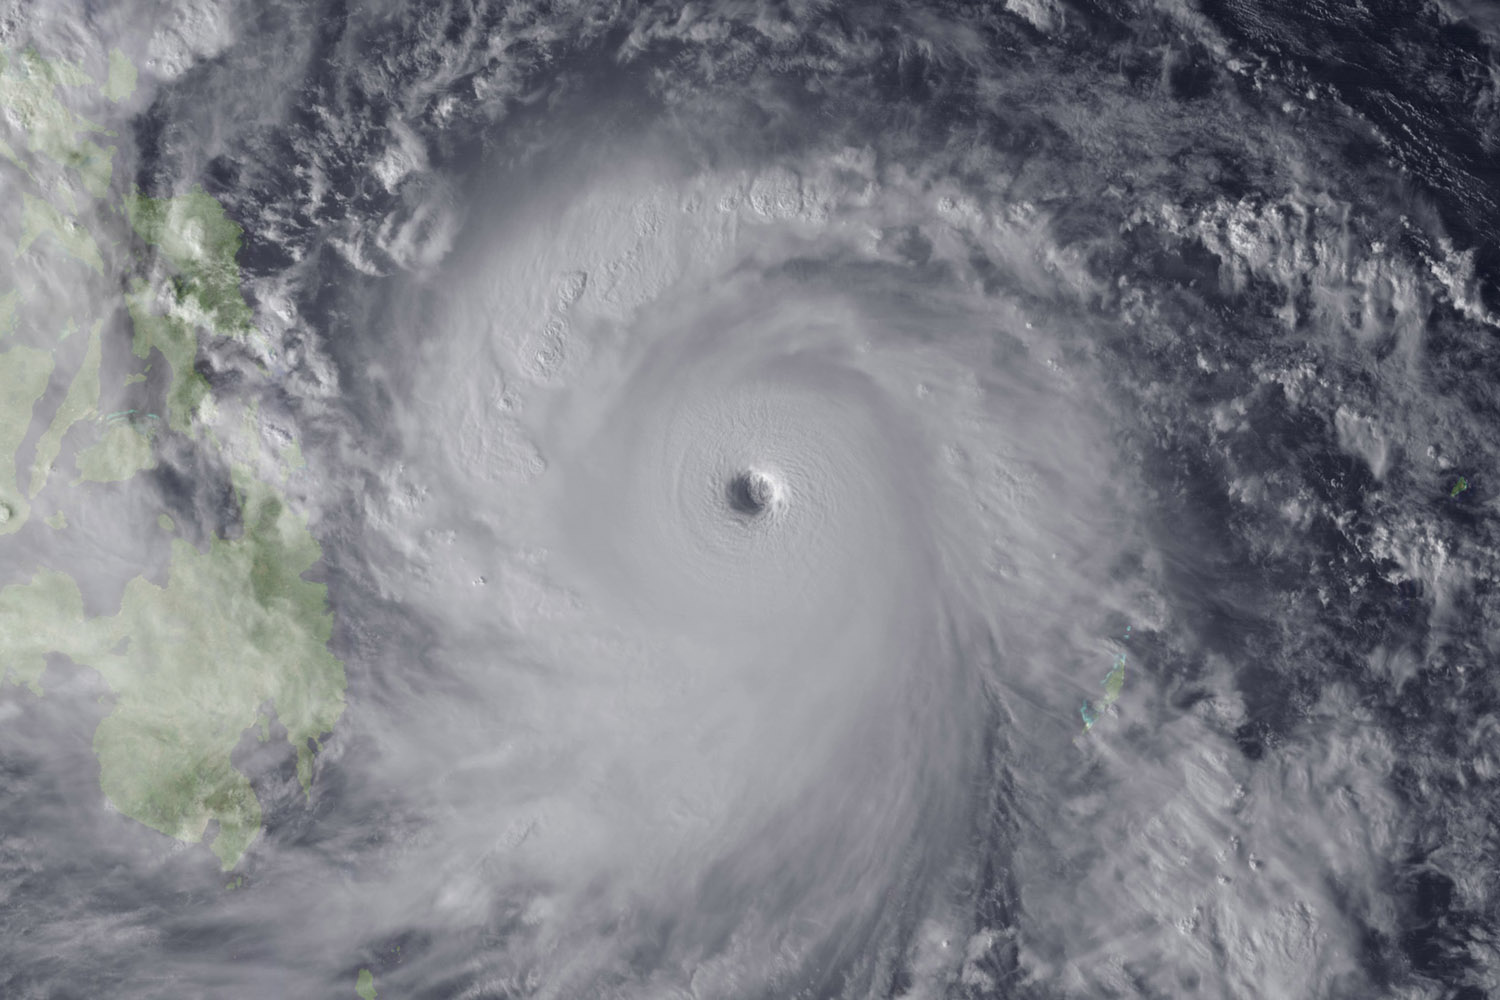 Super Typhoon Haiyan is seen approaching the Philippines in this Japan Meteorological Agency handout image